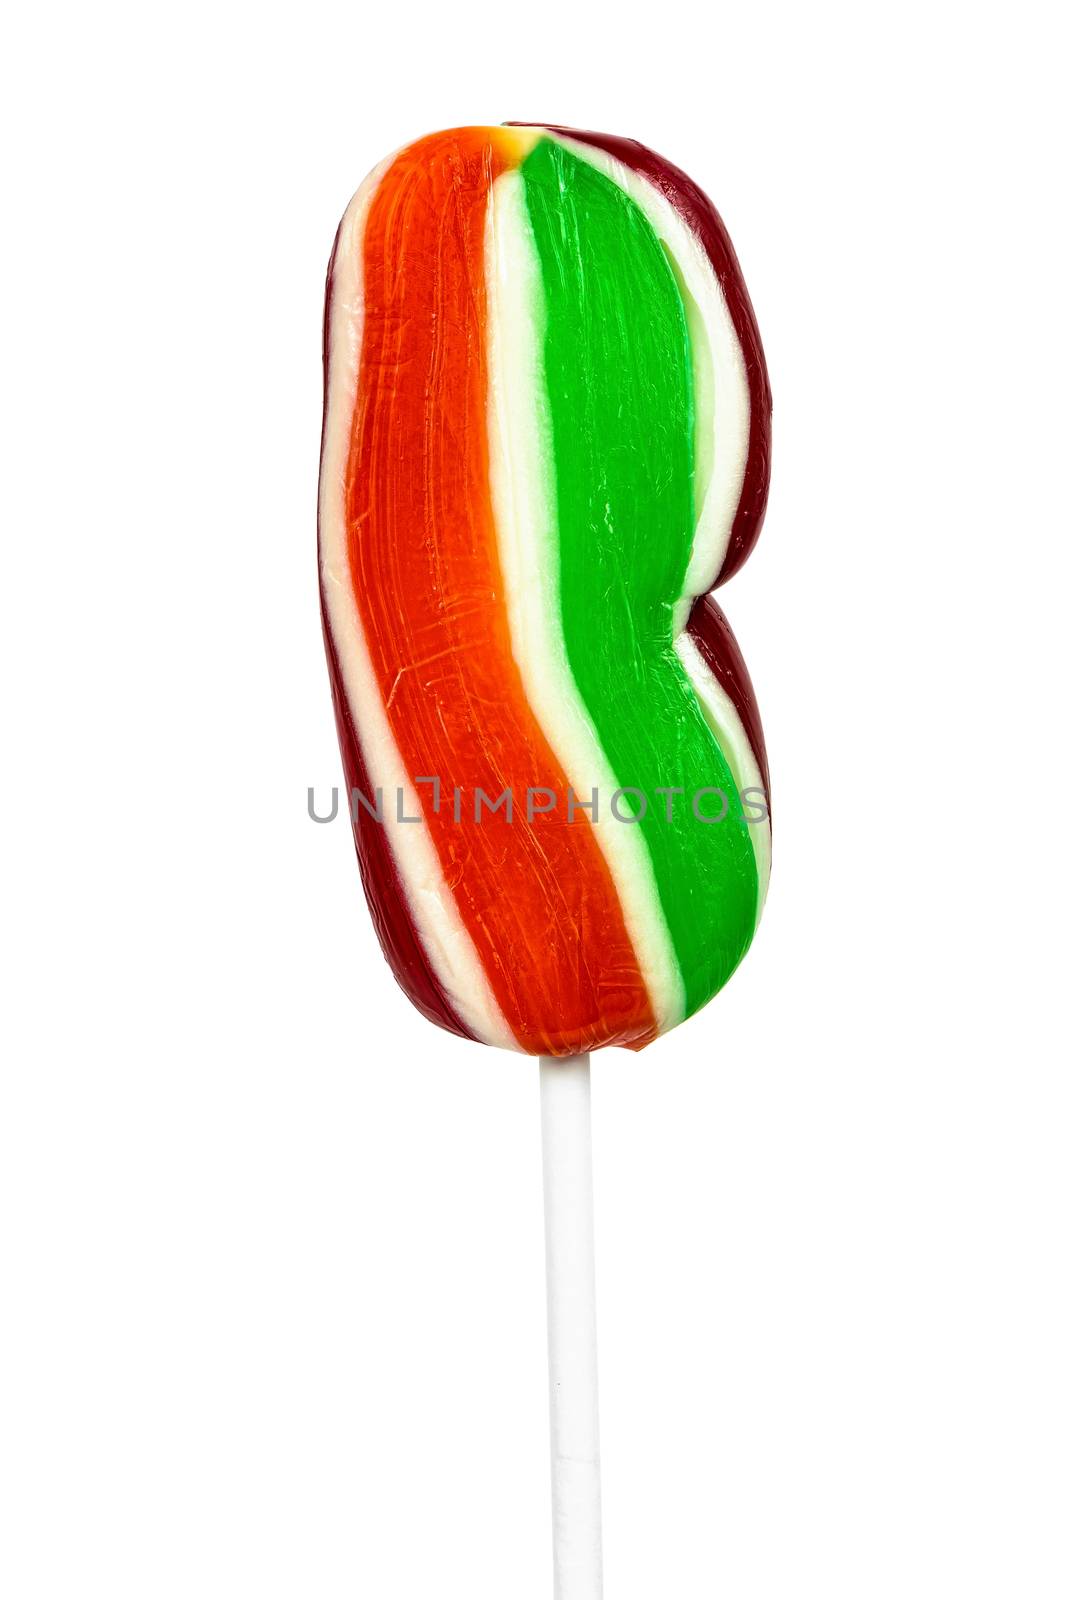 Colorful lollipop on white background by mkos83